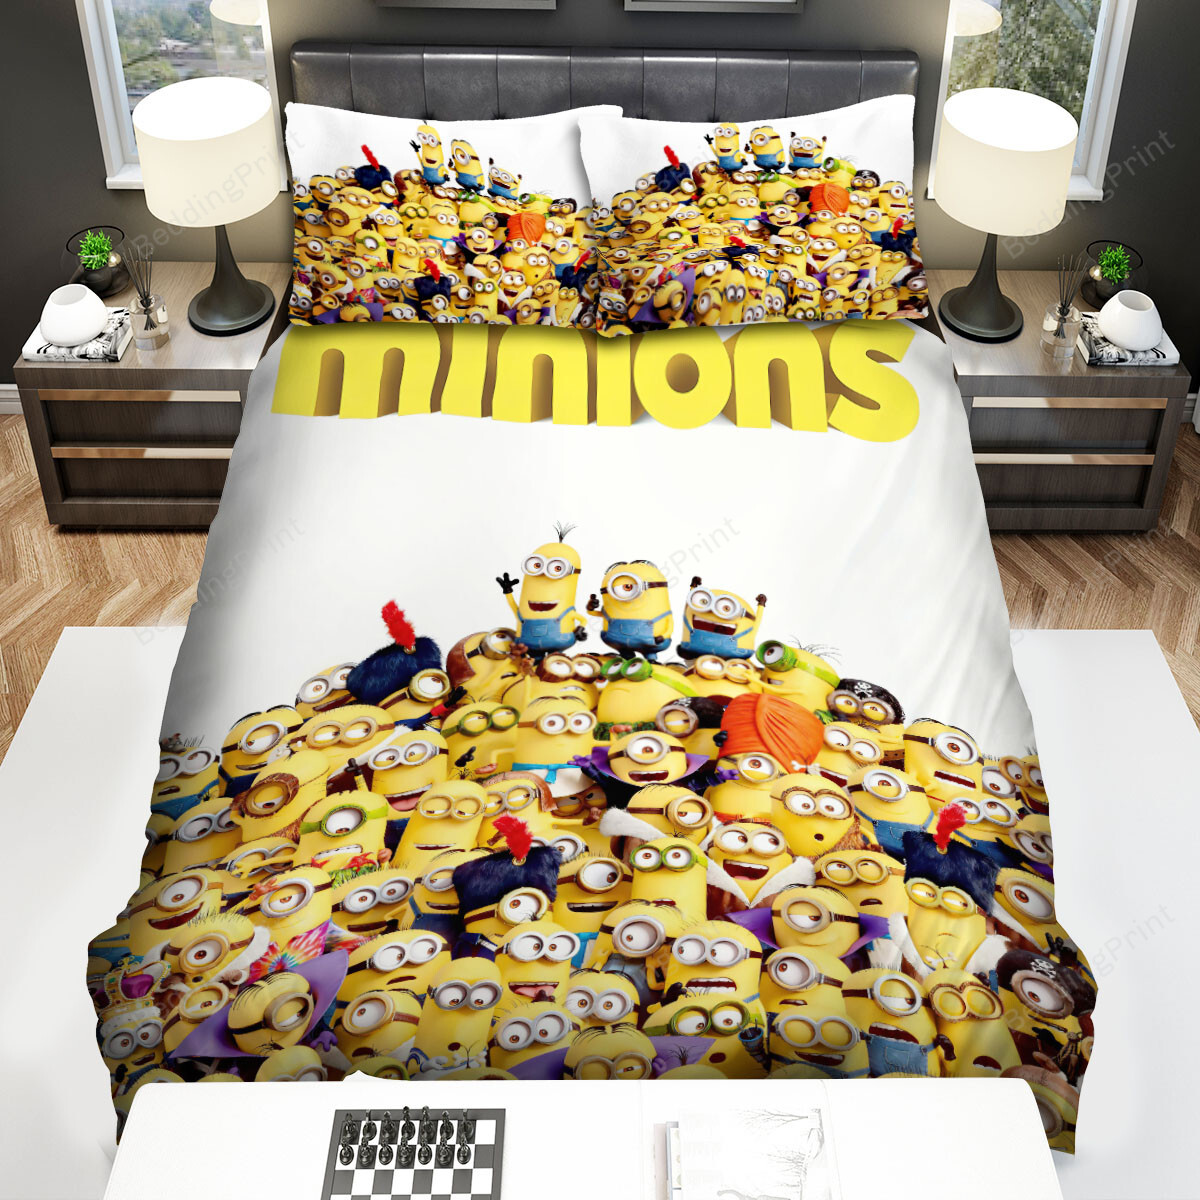 Minions Movie Poster 3 Bed Sheets Spread Comforter Duvet Cover Bedding Sets